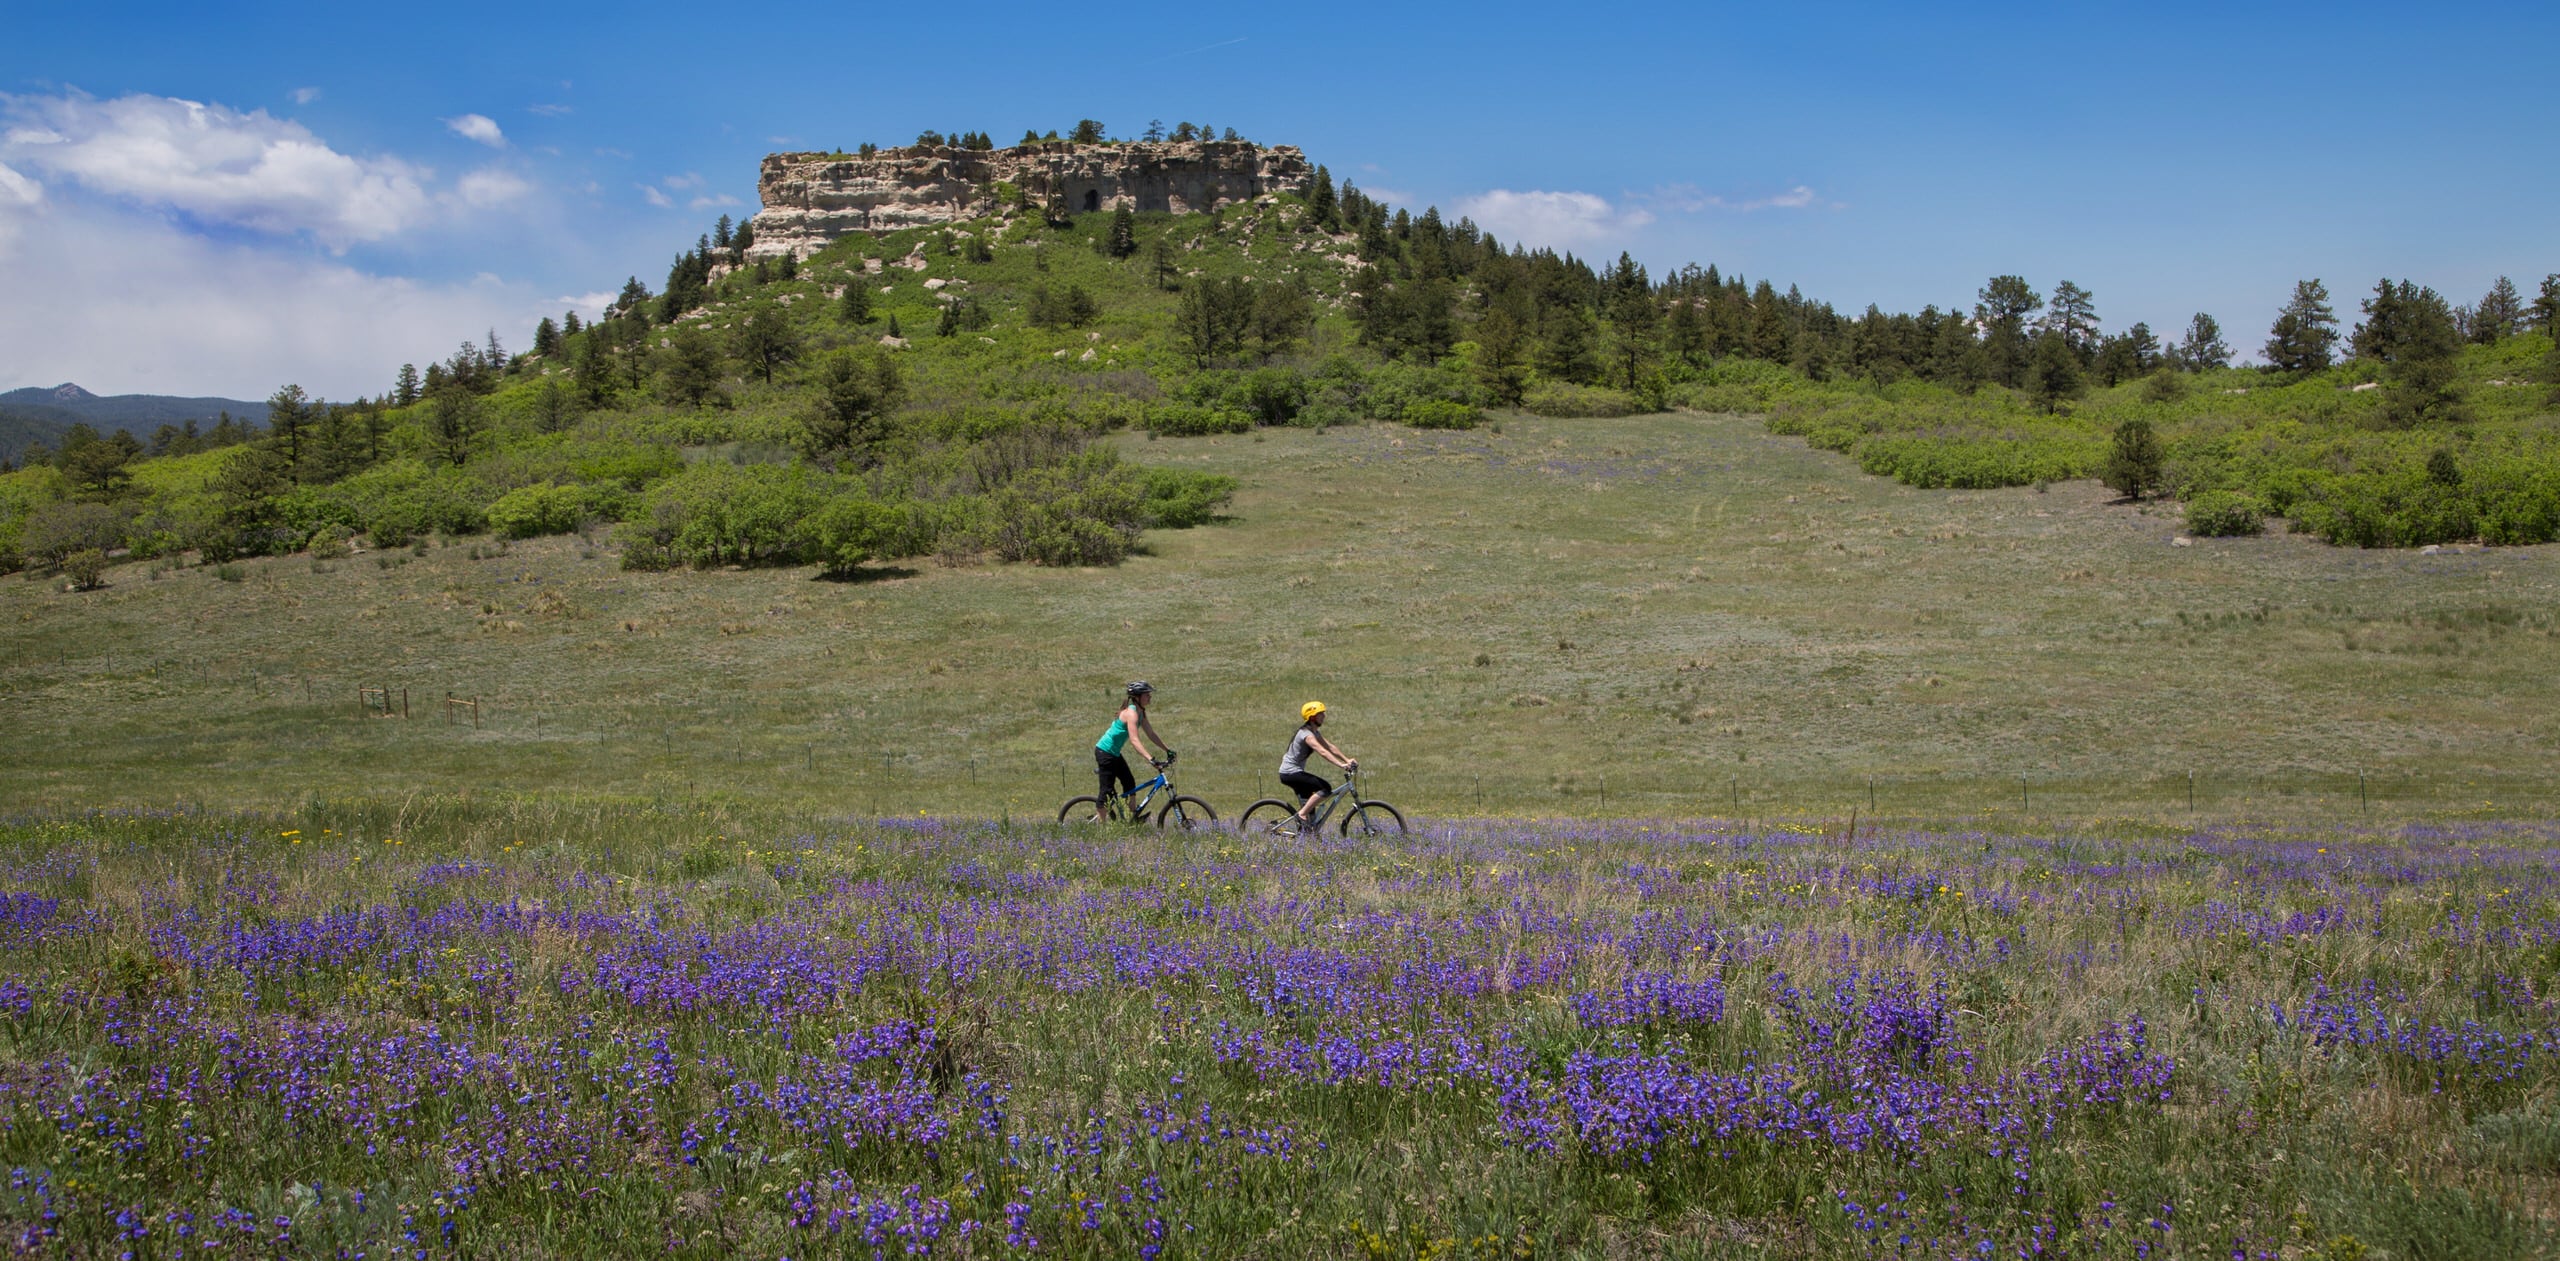 Girls biking on trail with green bluff in background and wildflowers in foreground